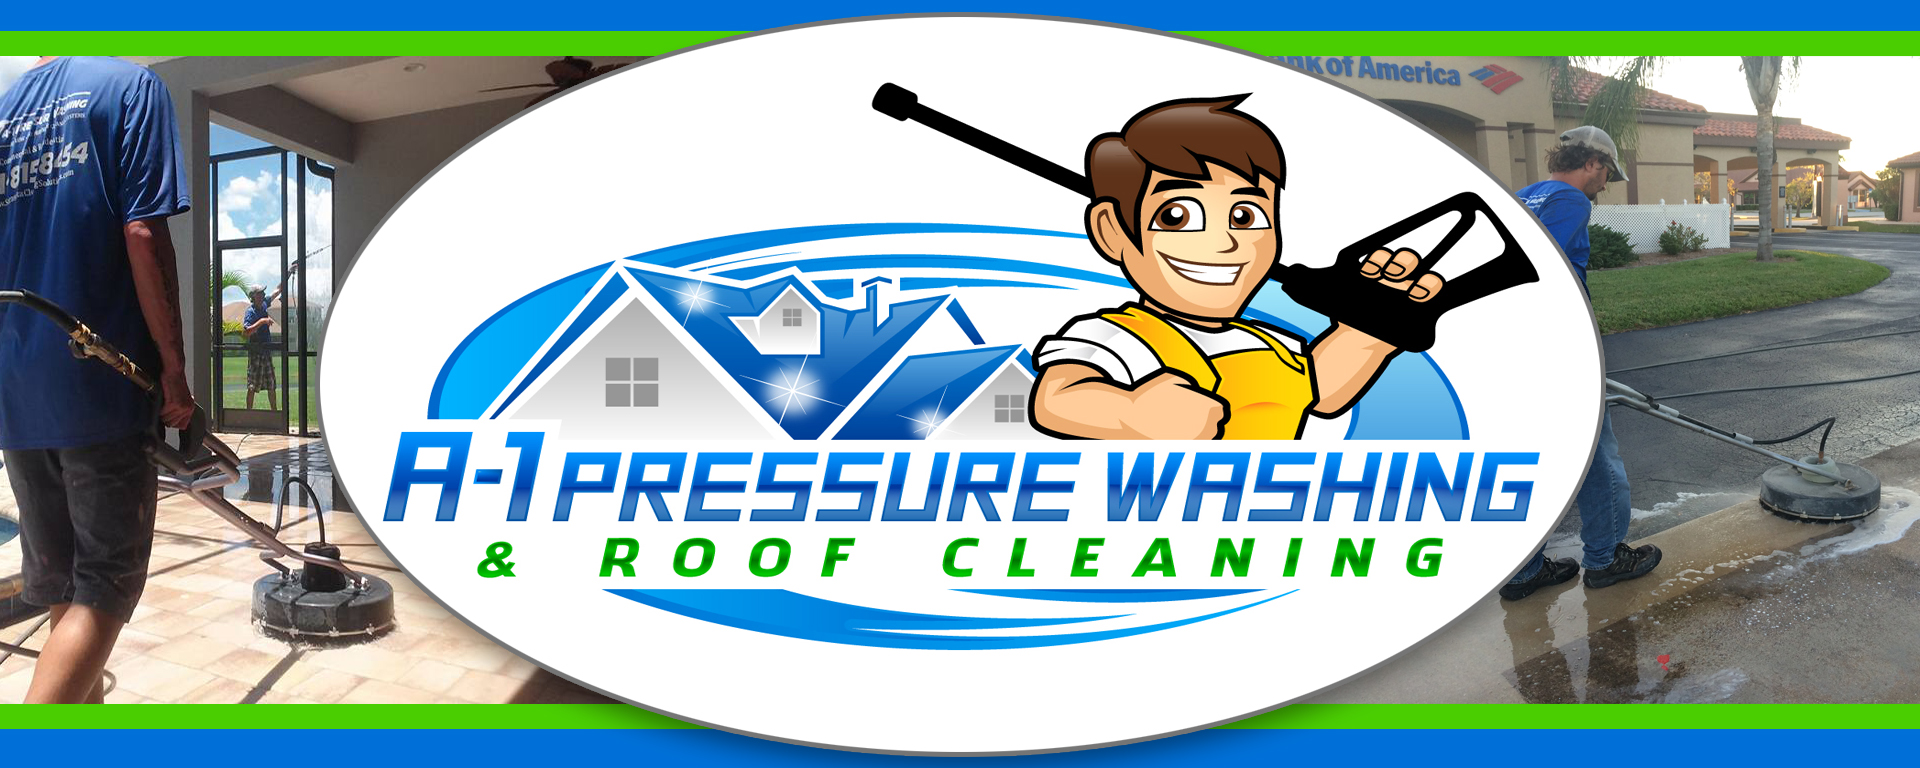 A-1 Pressure Washing & Roof Cleaning Company logo